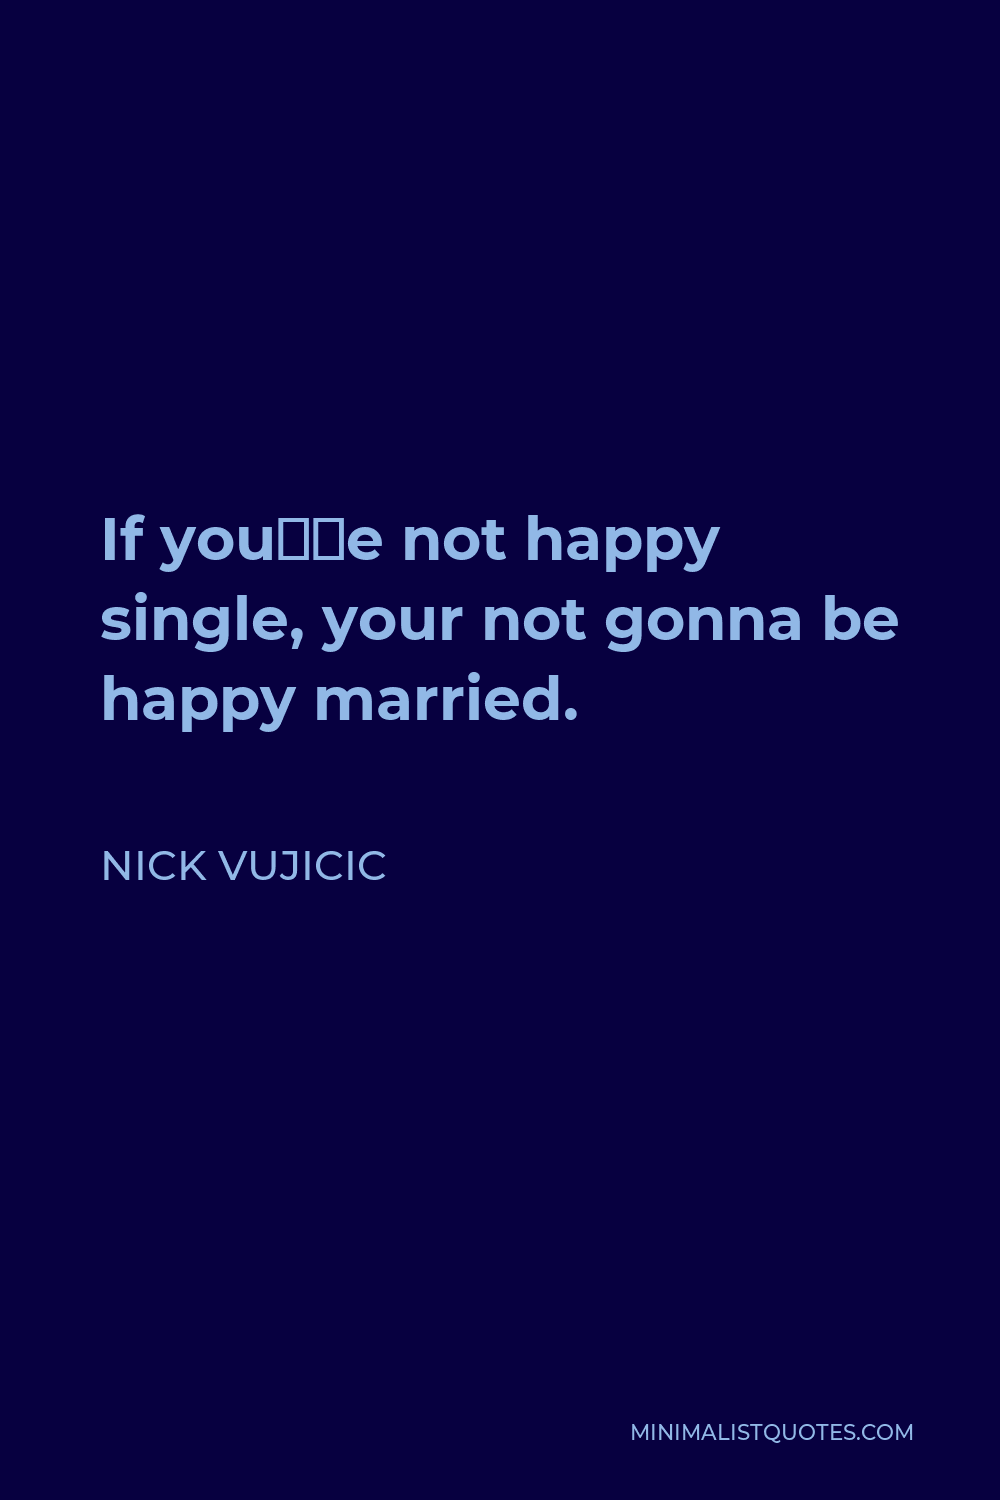 Nick Vujicic Quote - If you’re not happy single, your not gonna be happy married.